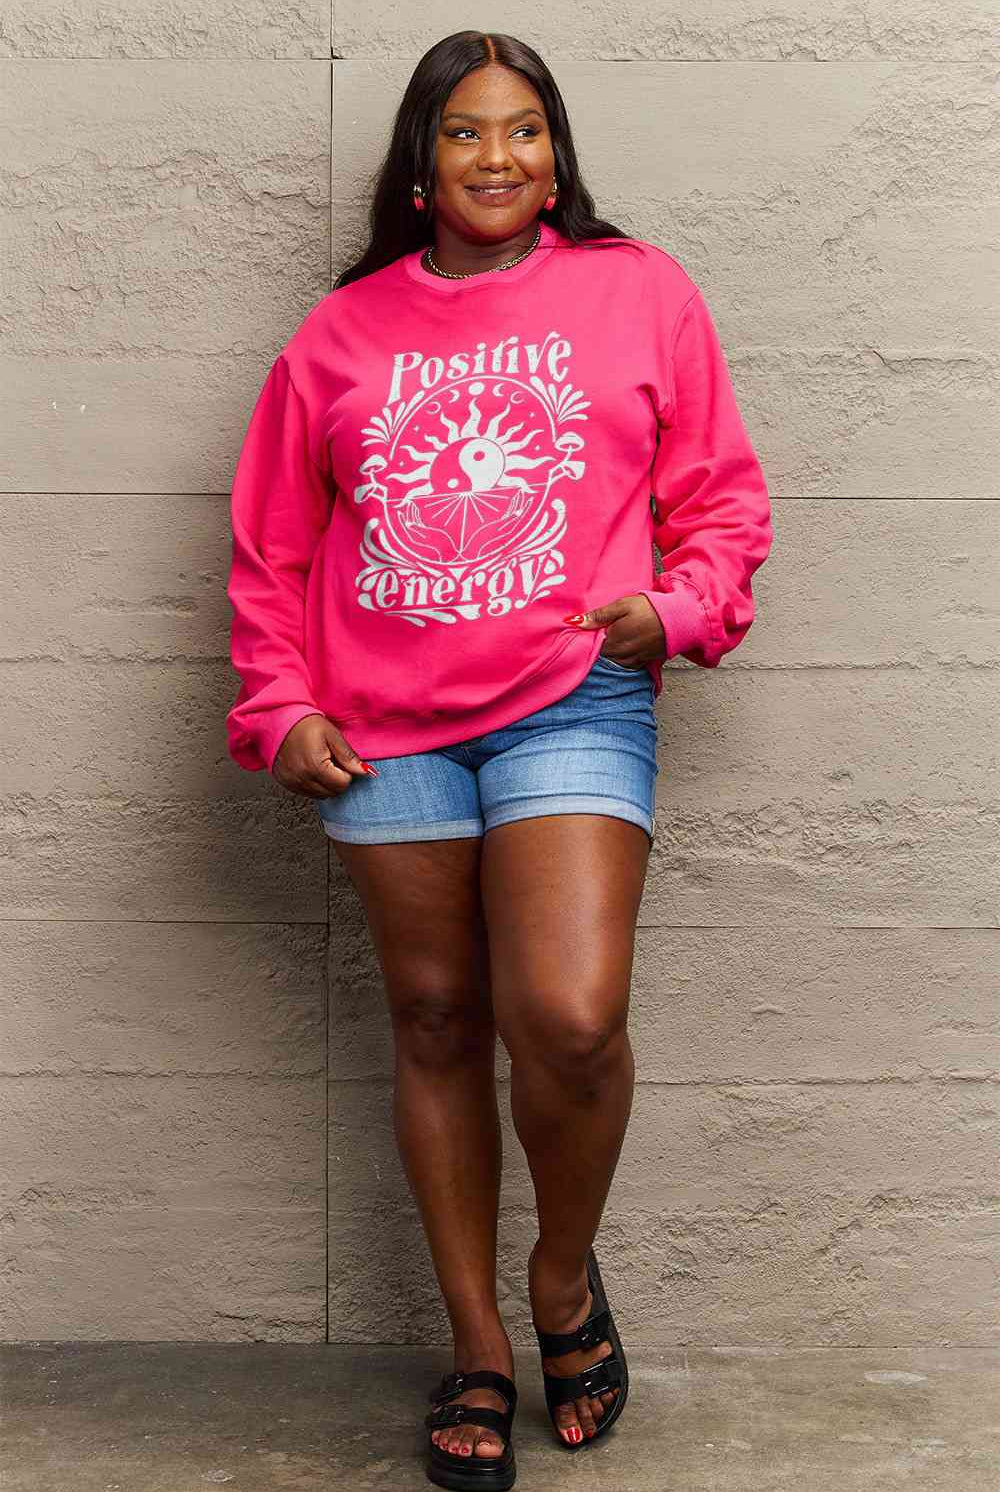 Simply Love Full Size POSITIVE ENERGY Graphic Sweatshirt - GemThreads Boutique